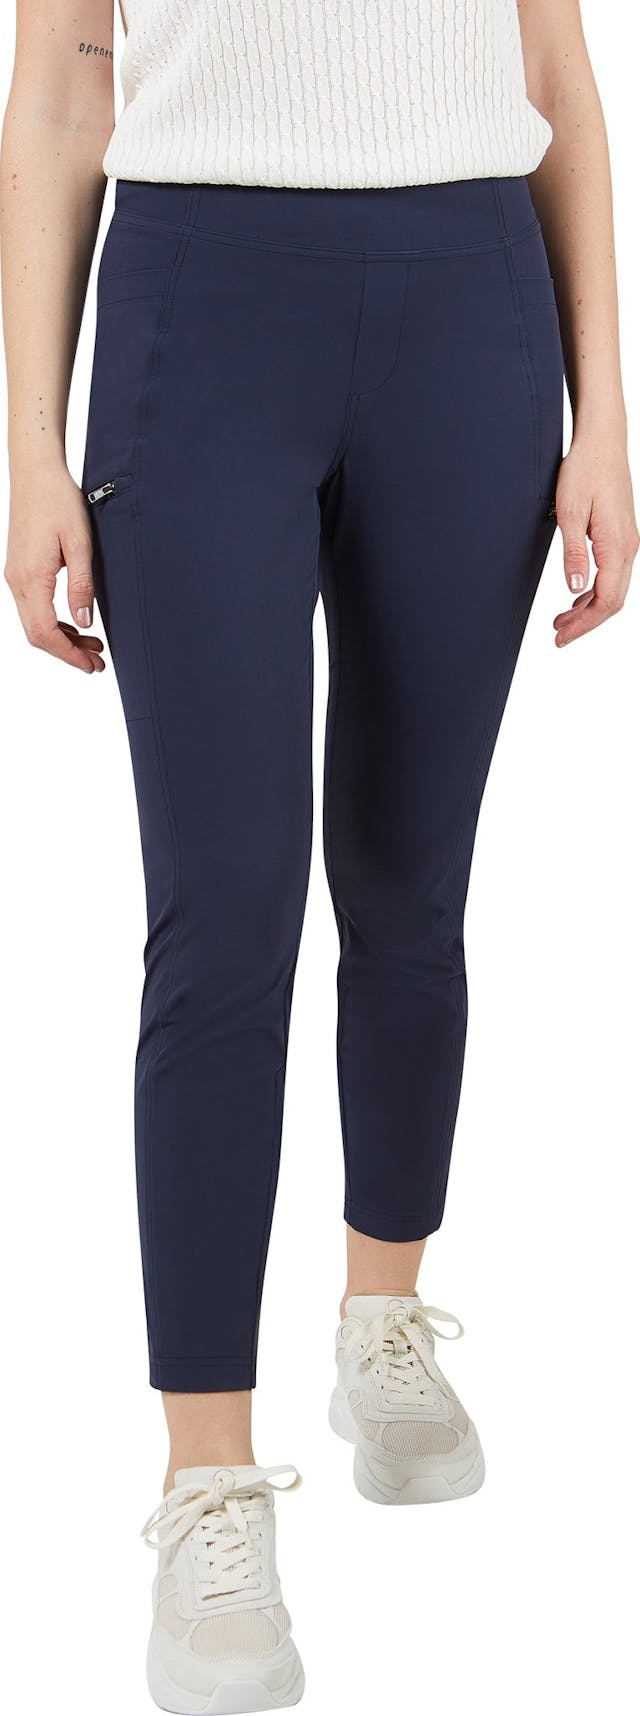 Product image for Fundy Pants - Women's